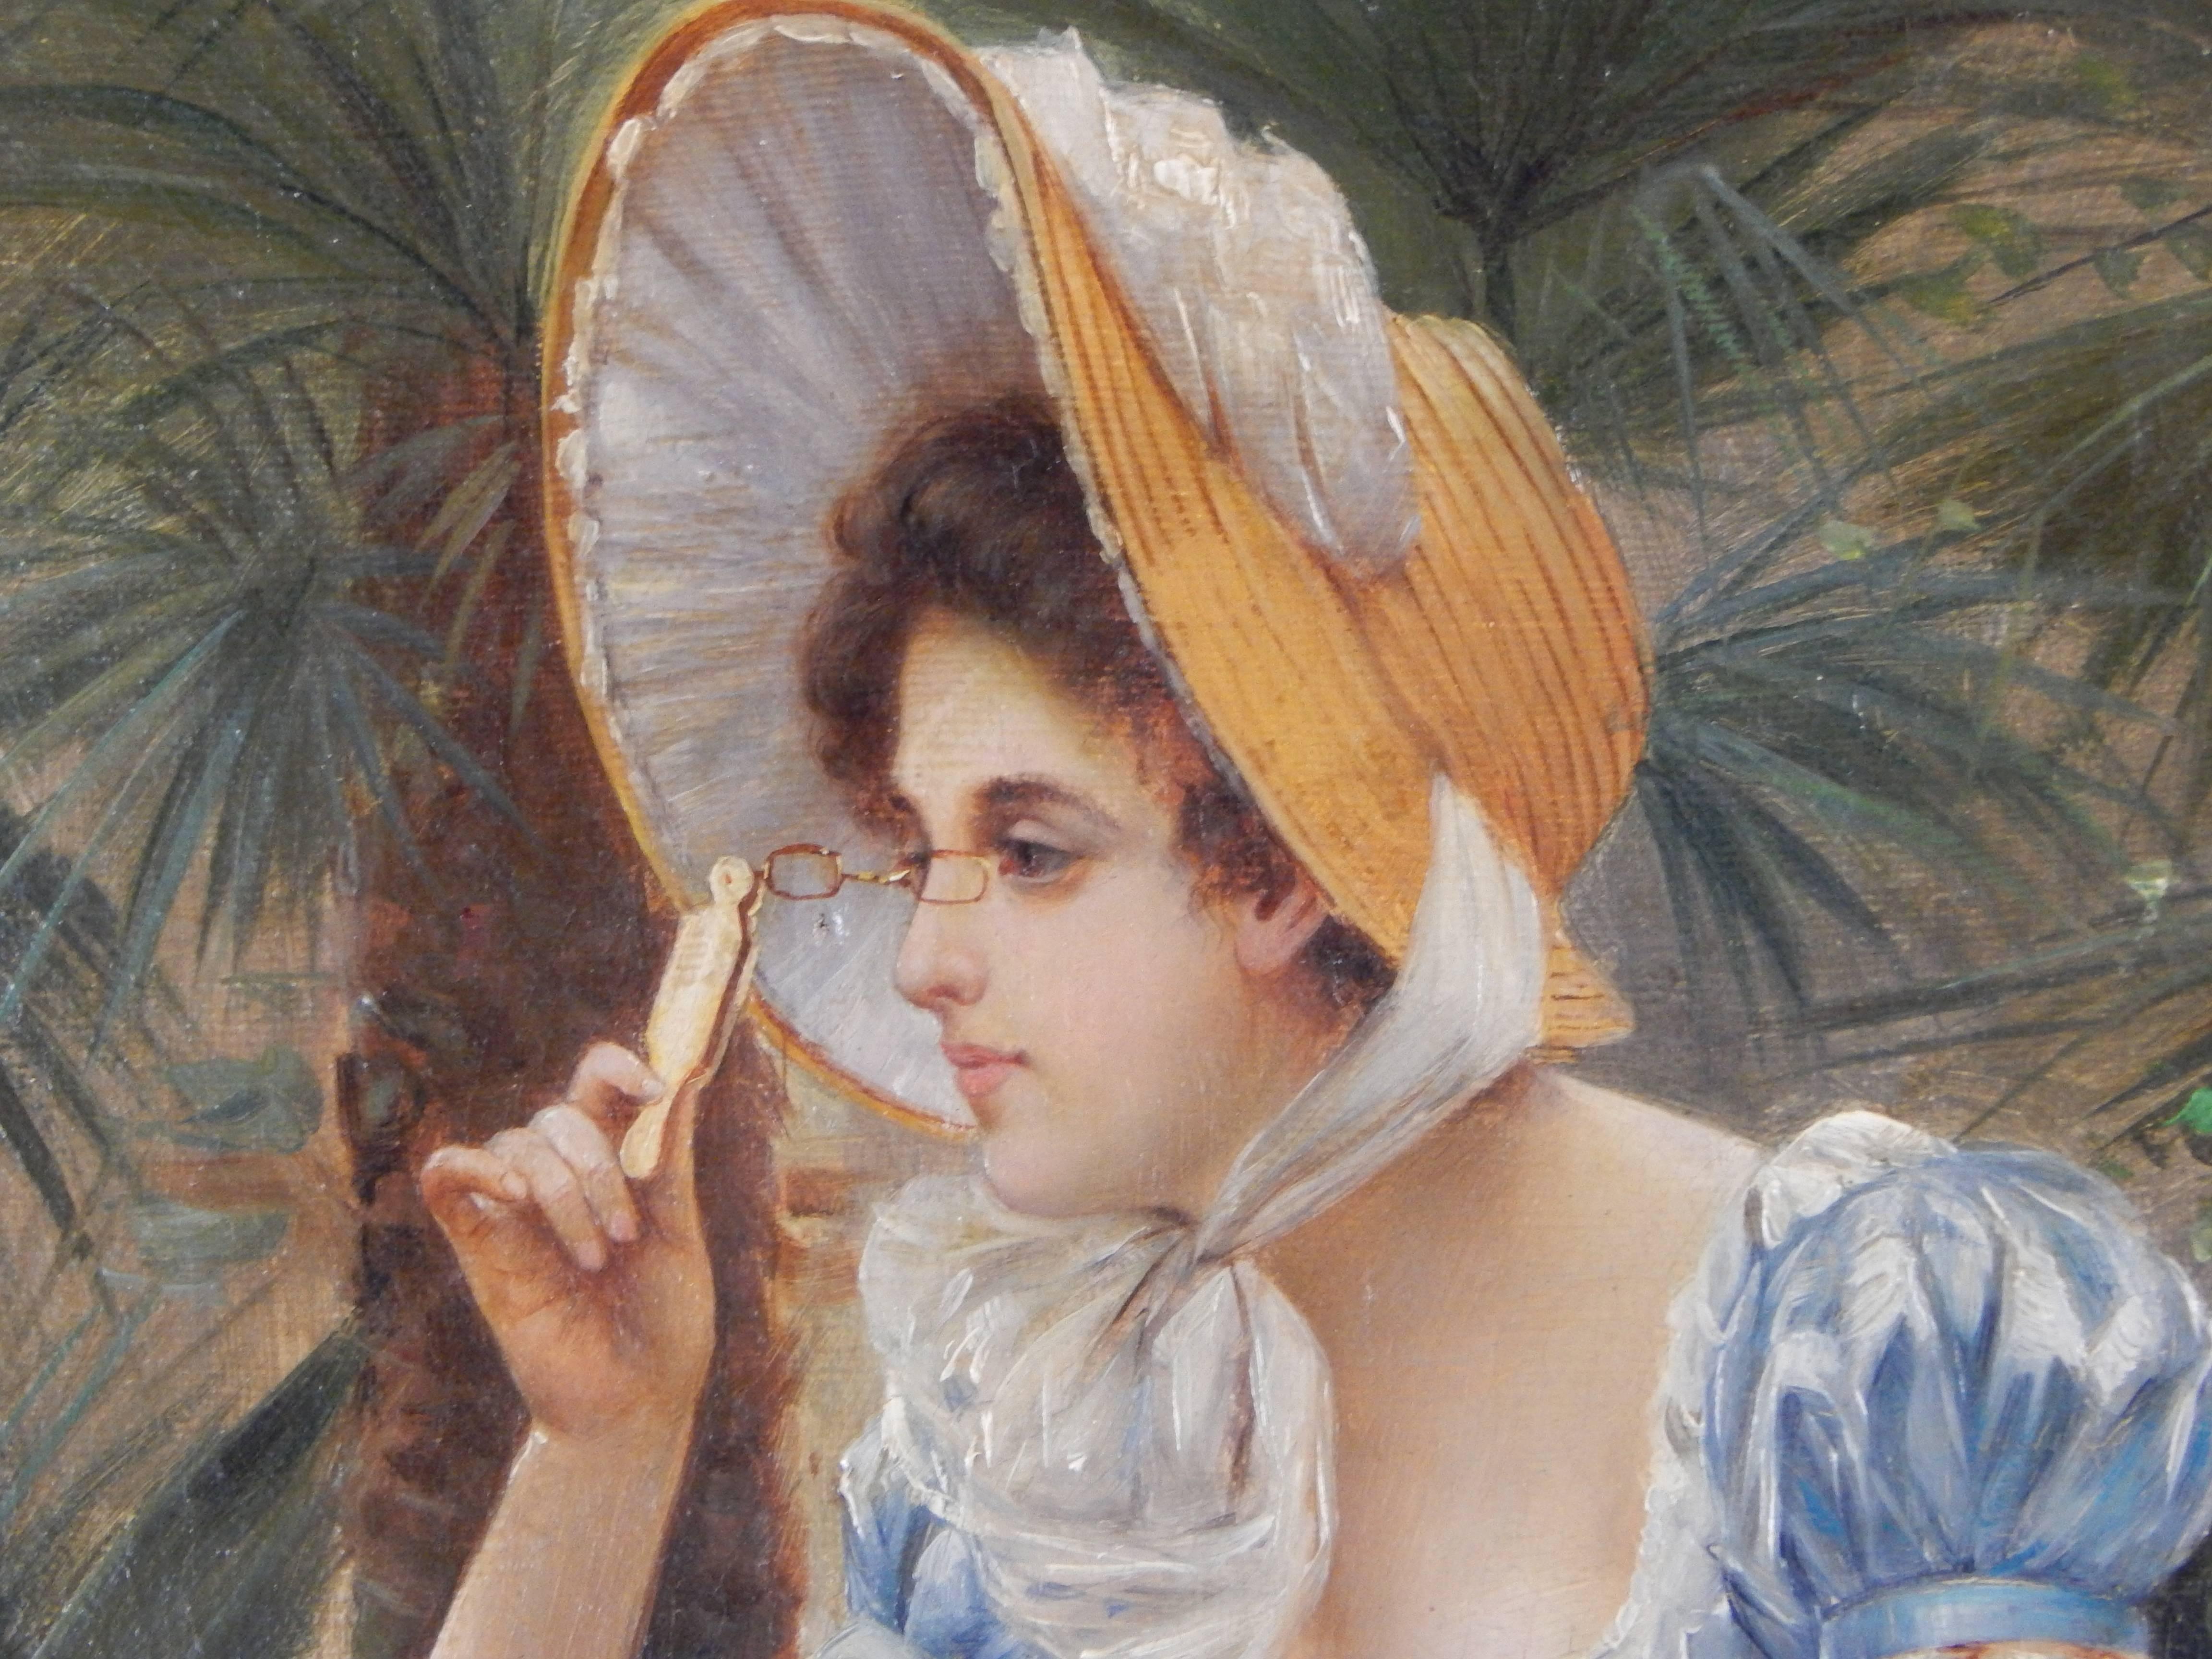 Excellent Quality 19th Century Oil Painting of a Pretty Woman In Good Condition For Sale In Bridgeport, CT